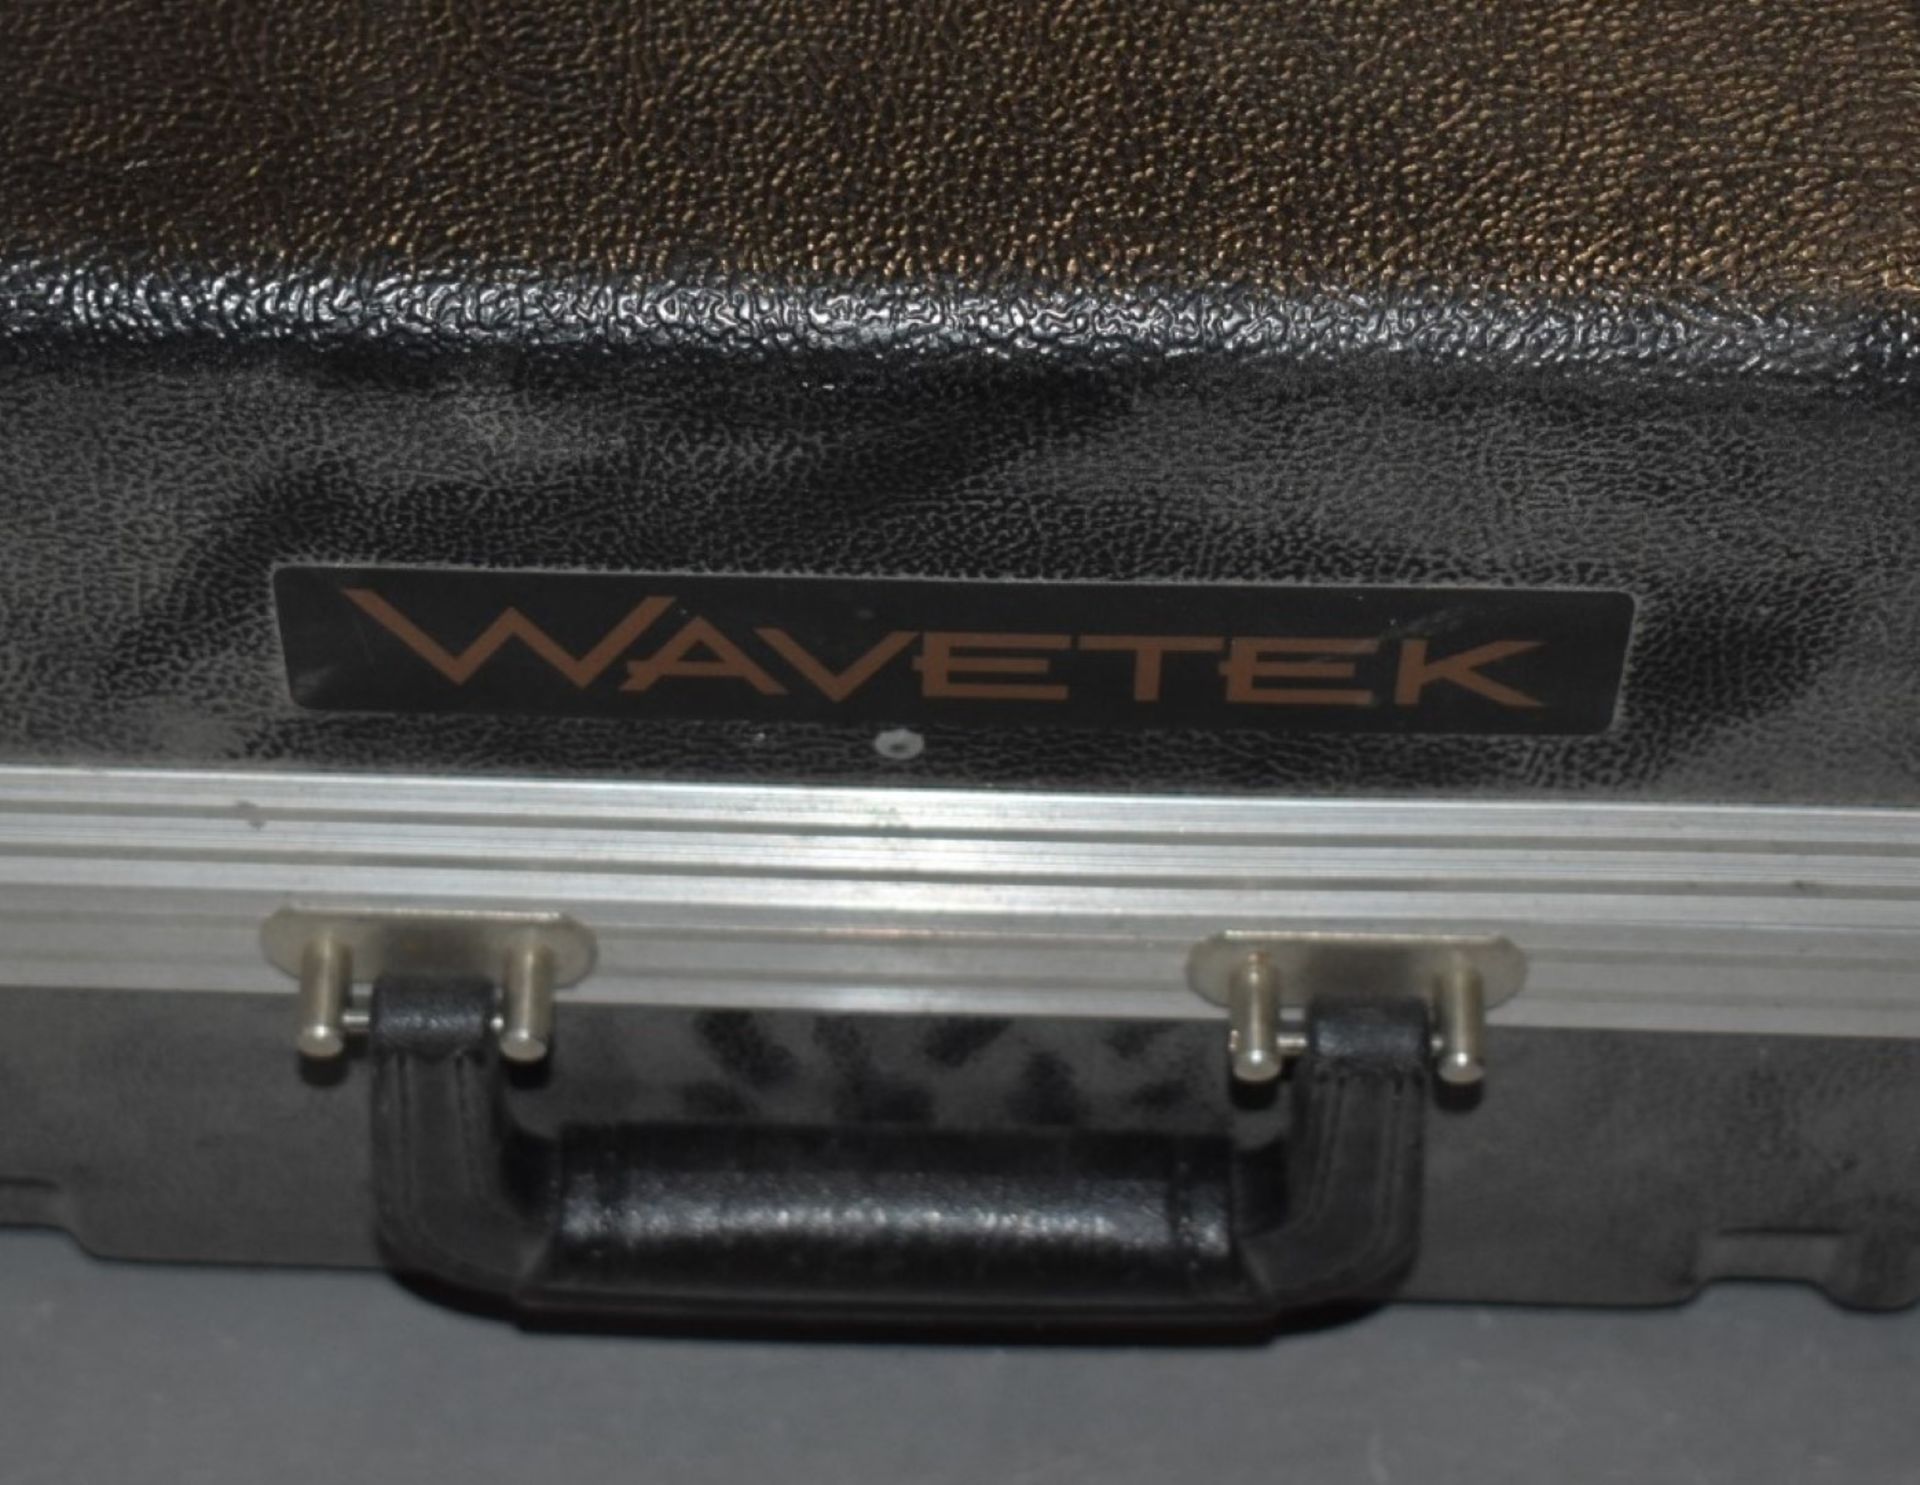 1 x Wavetek LT8600T 300MHz Cable Tester Certifier Kit With Accessories and Carry Case - Image 3 of 11